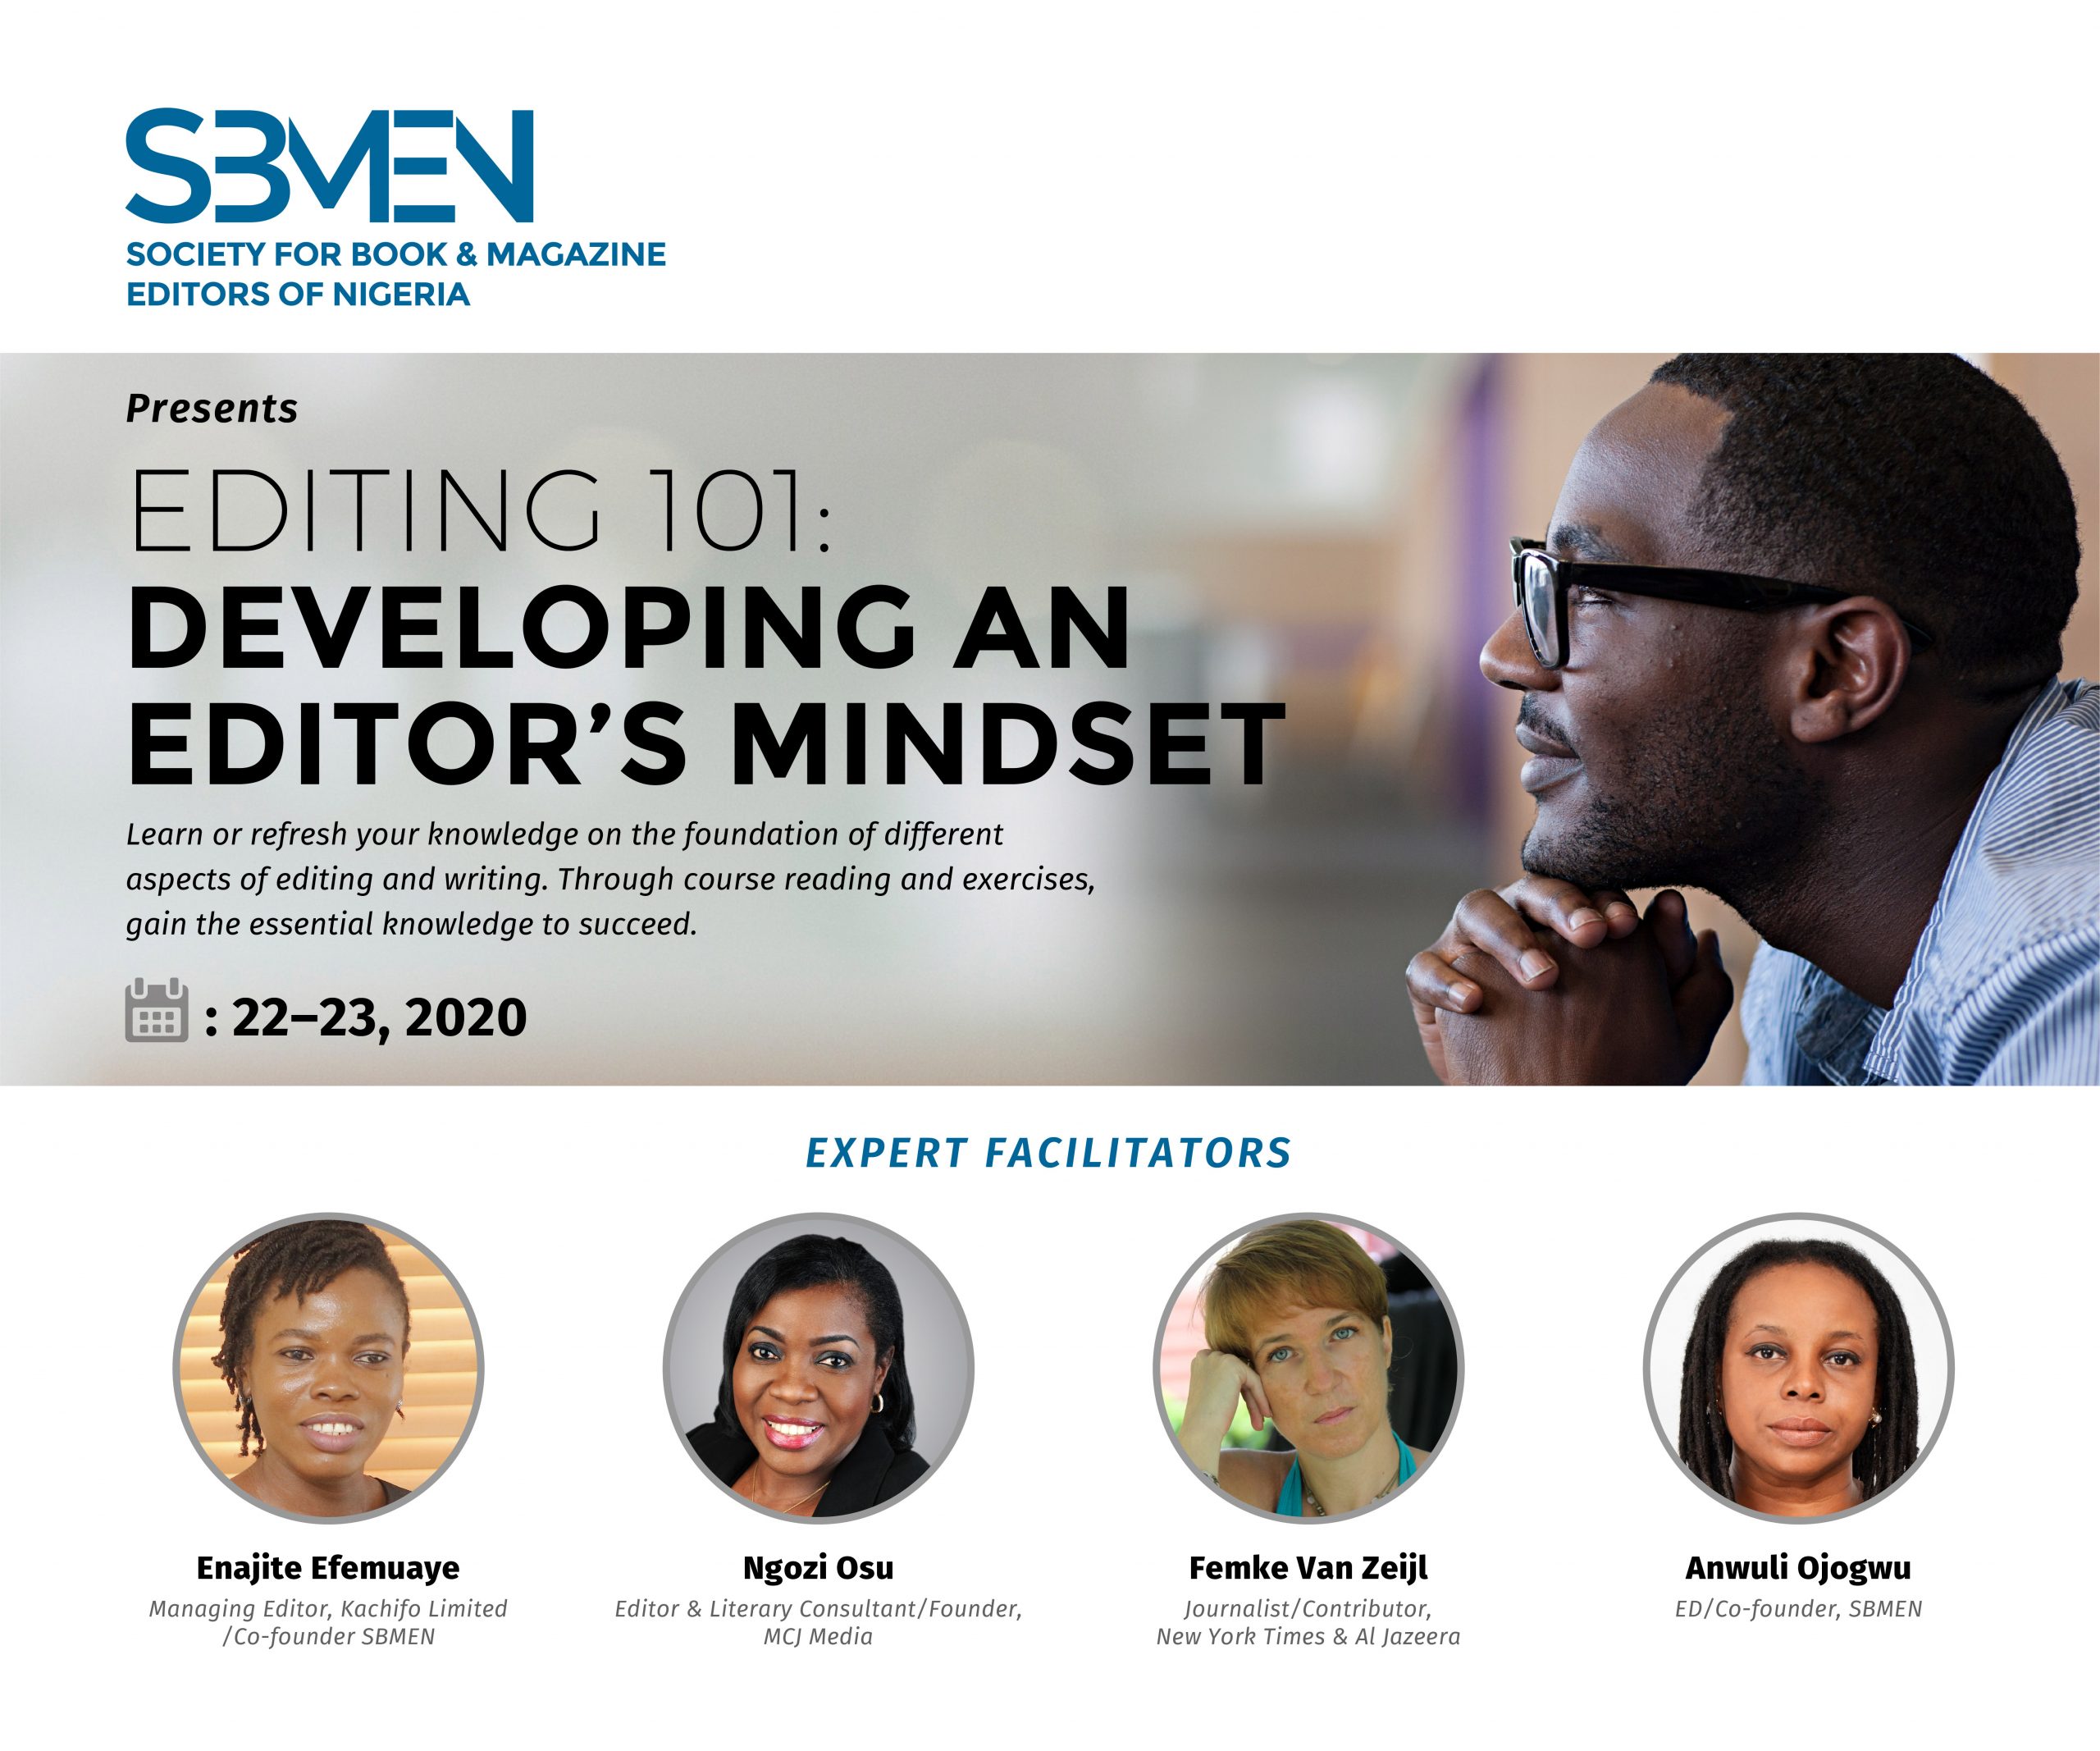 Register for the First SBMEN Workshop for Editors and Writers in 2020.